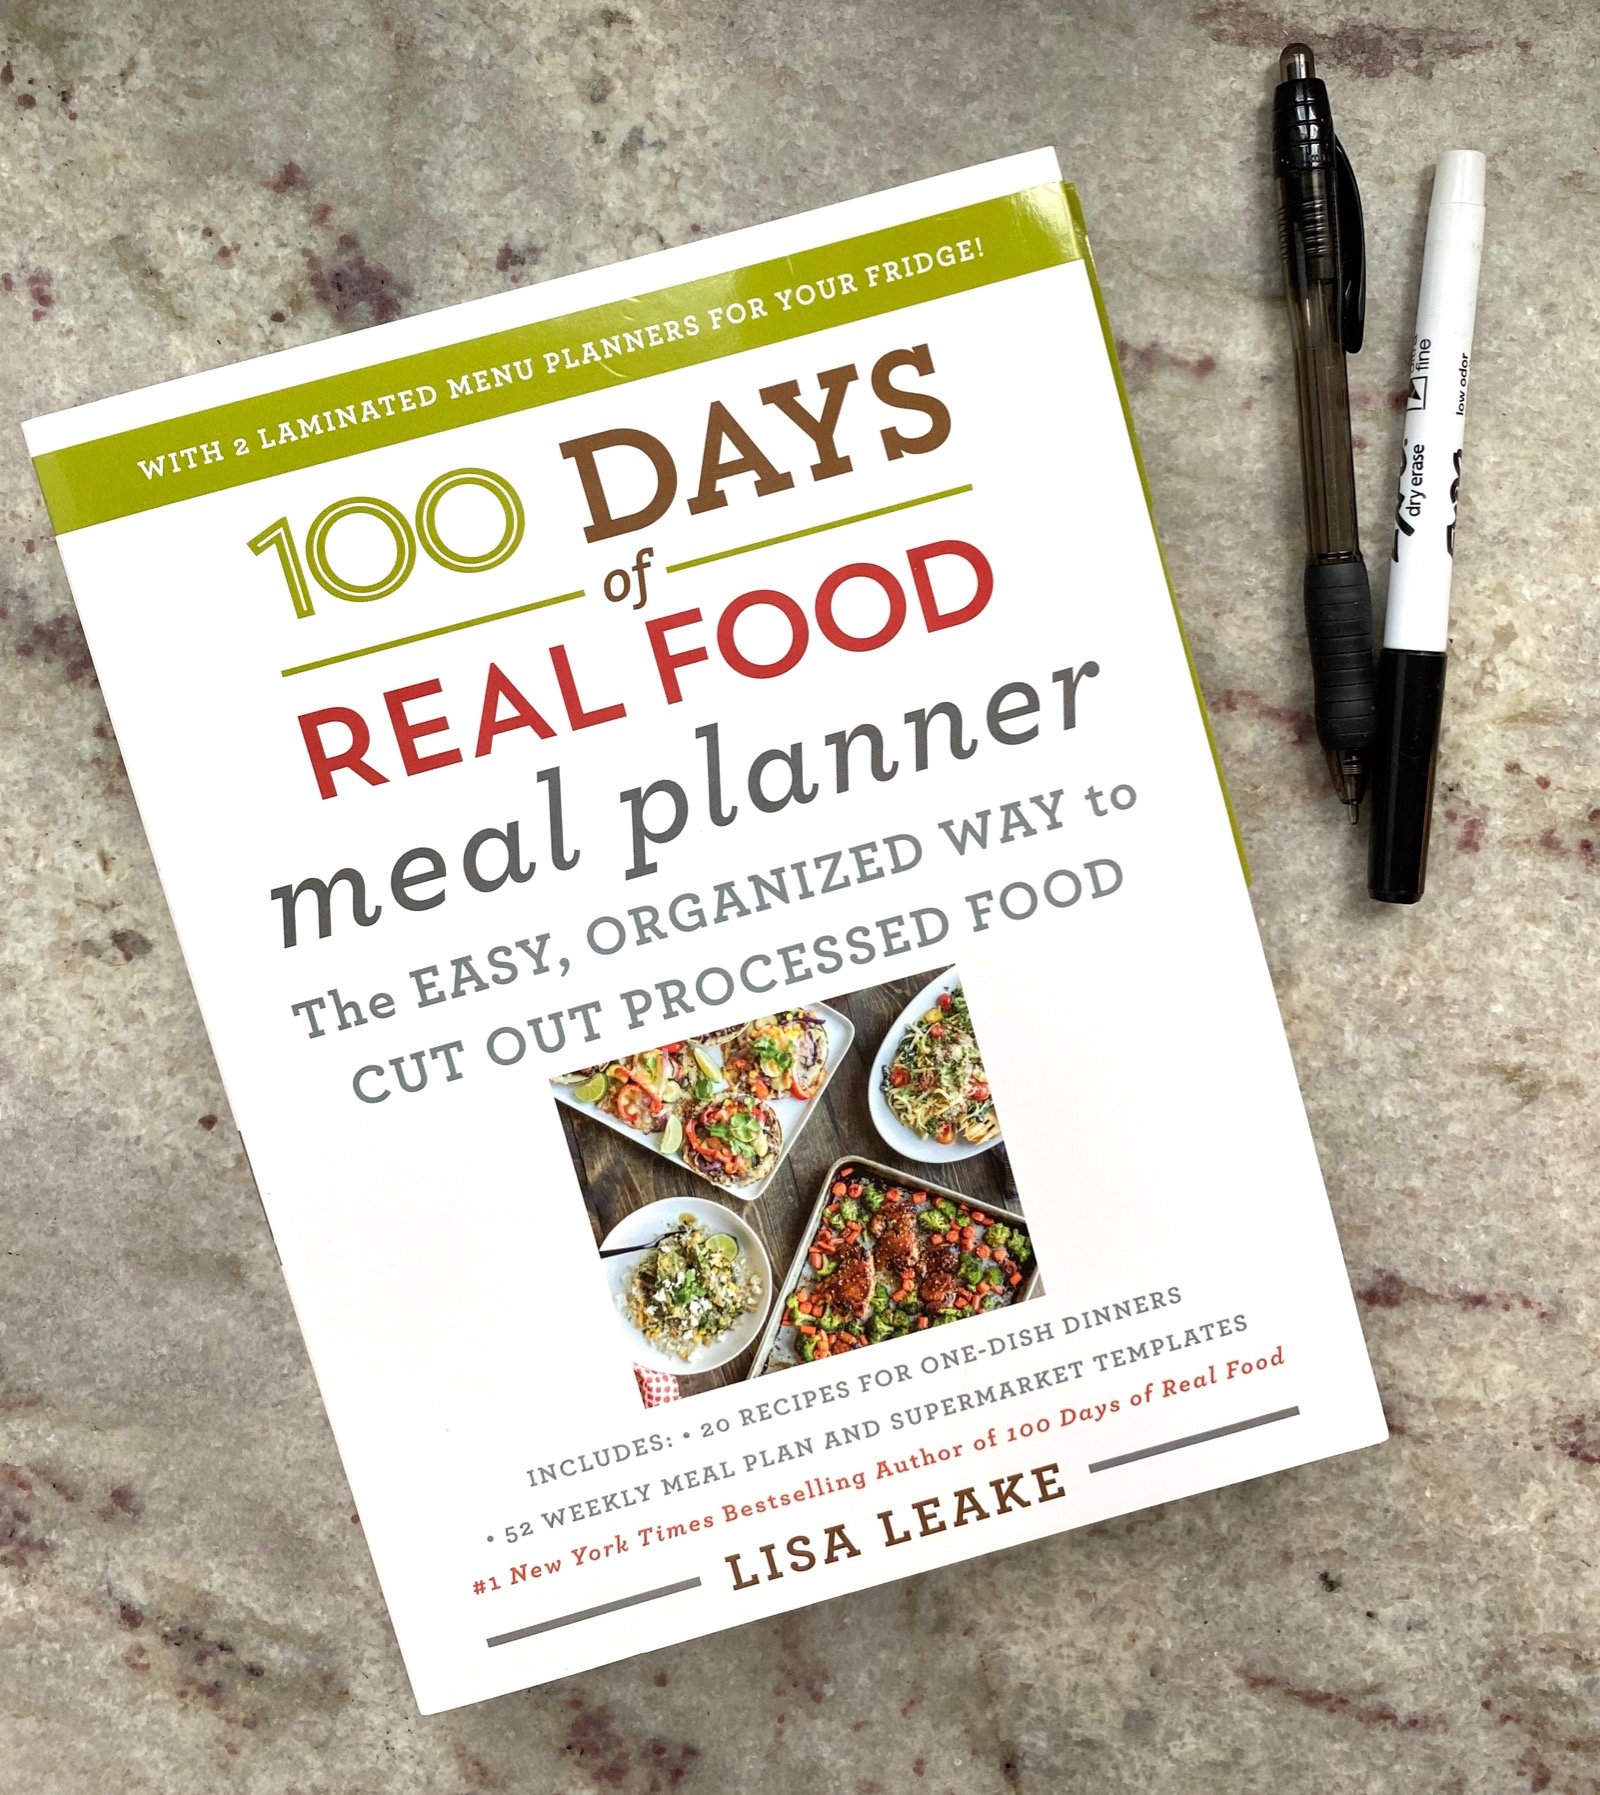 Meal Planner Workbook on 100 Days of Real Food